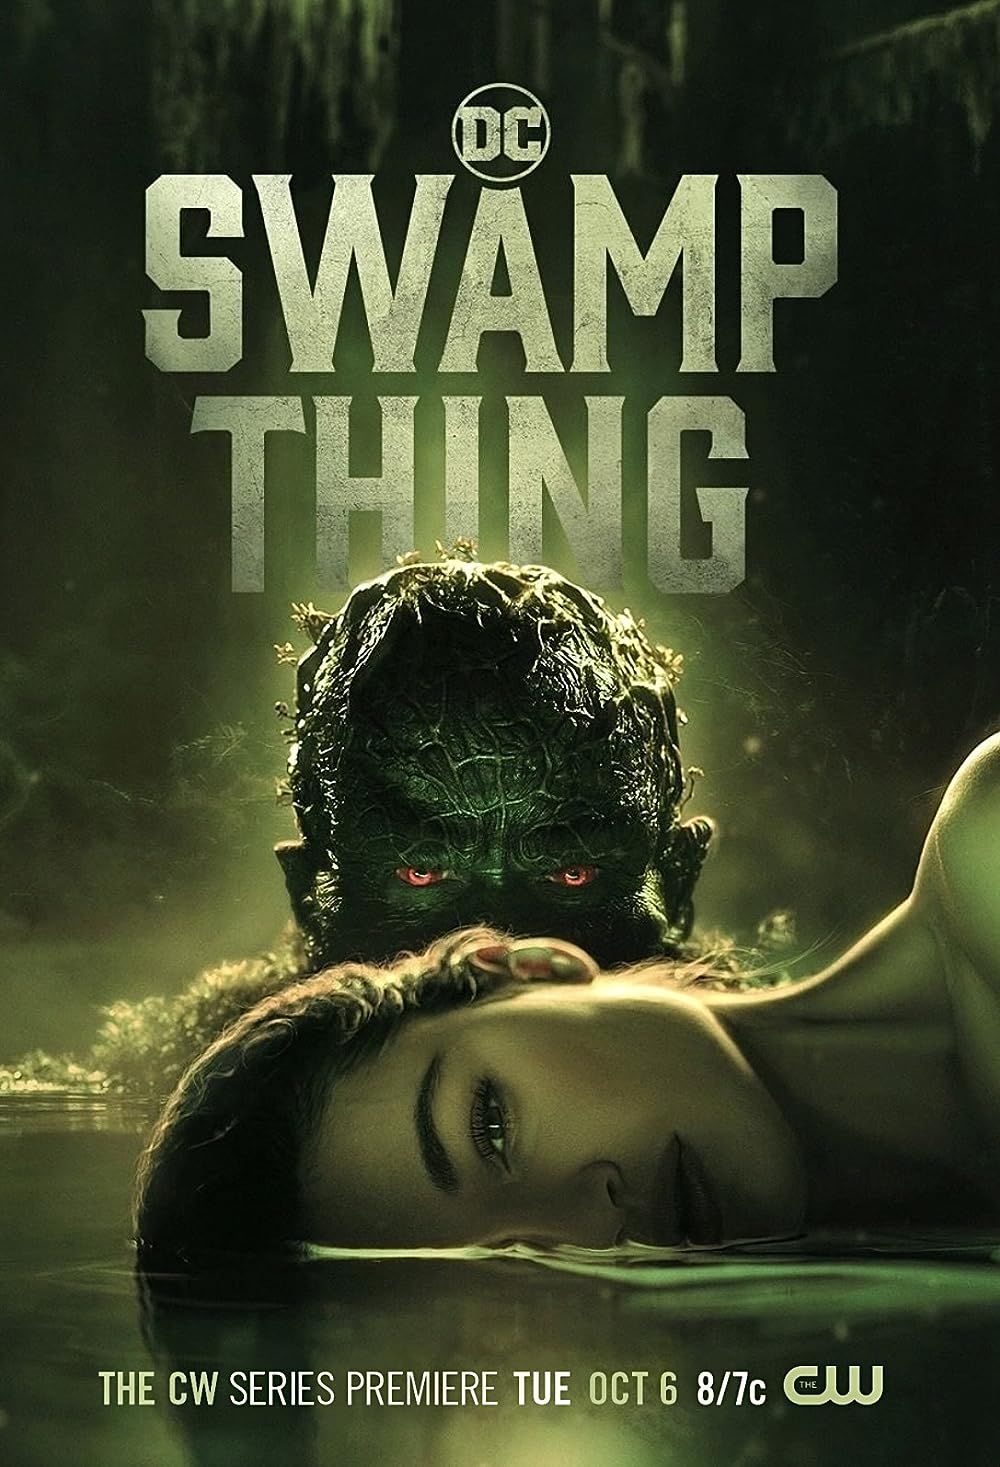 Swamp Thing and Crystal Reed on the Swamp Thing Promo